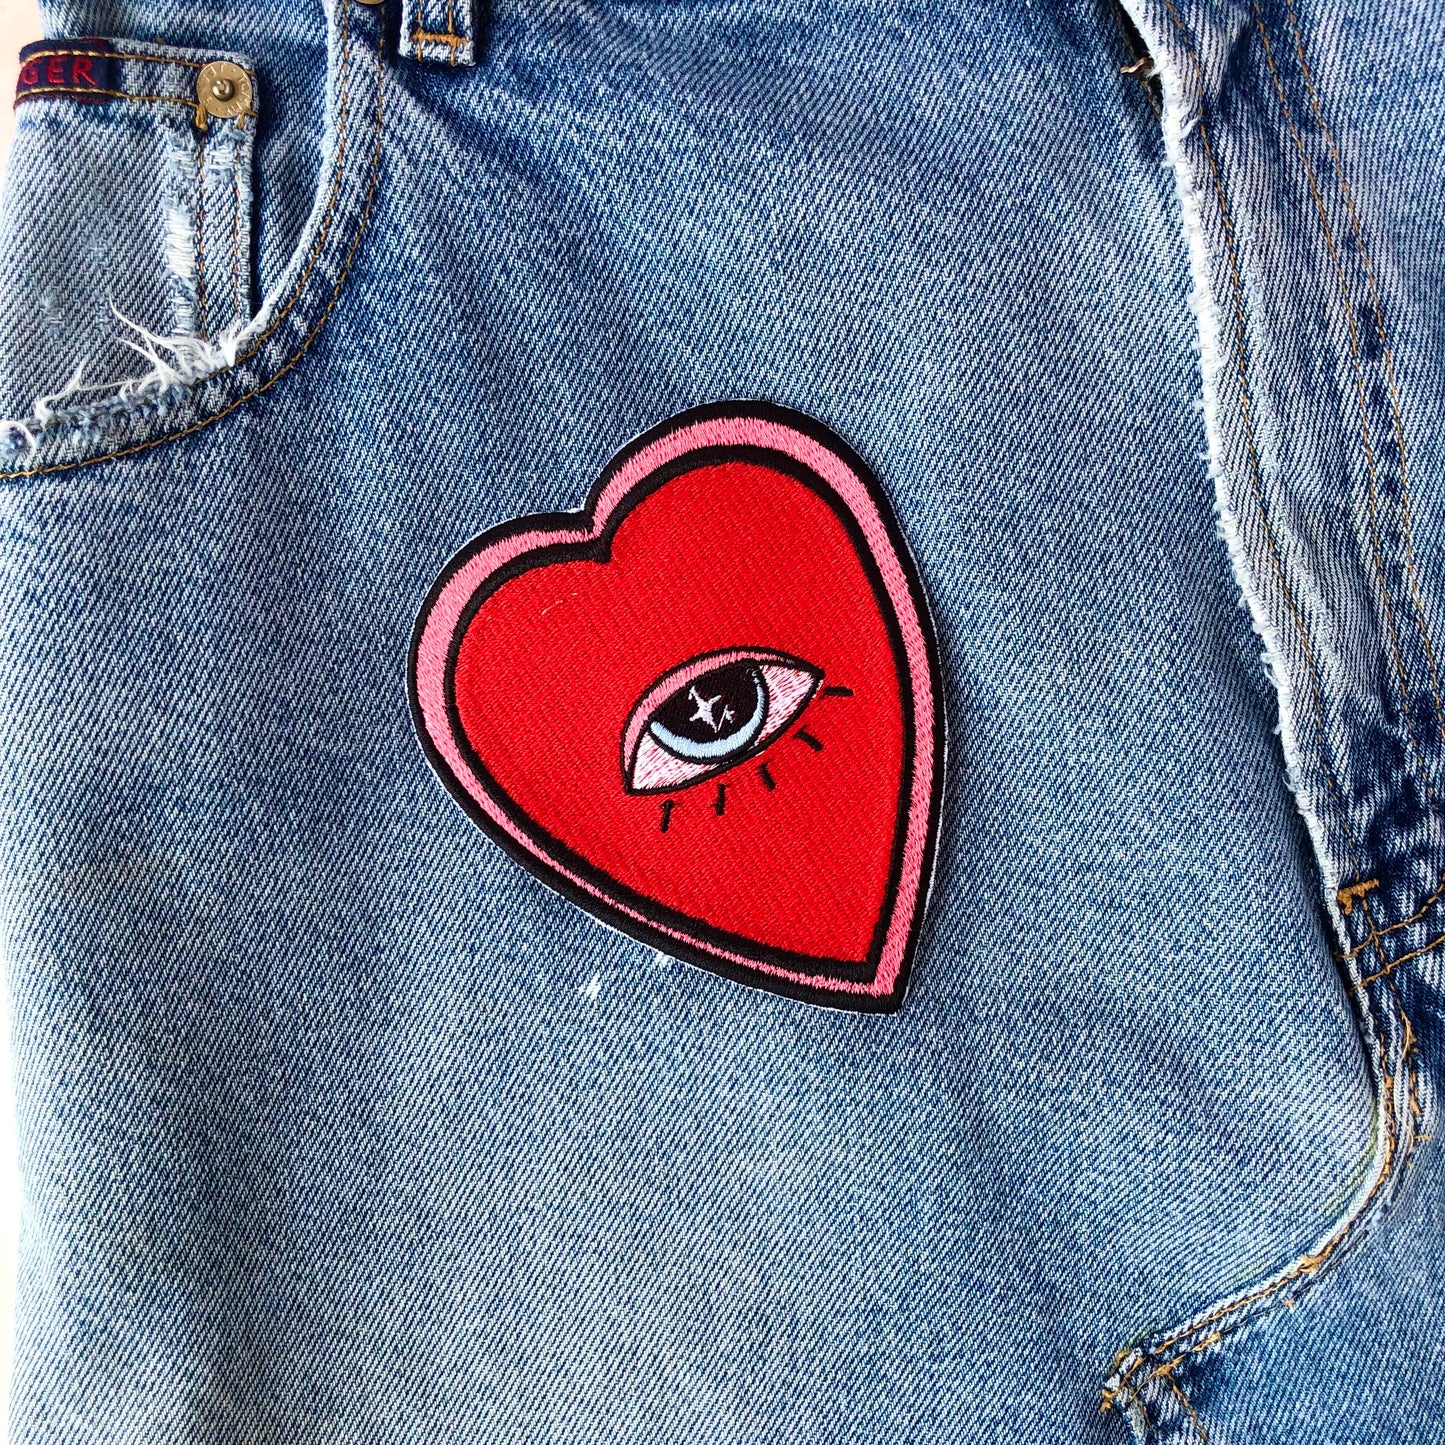 EMBROIDERED PATCHES